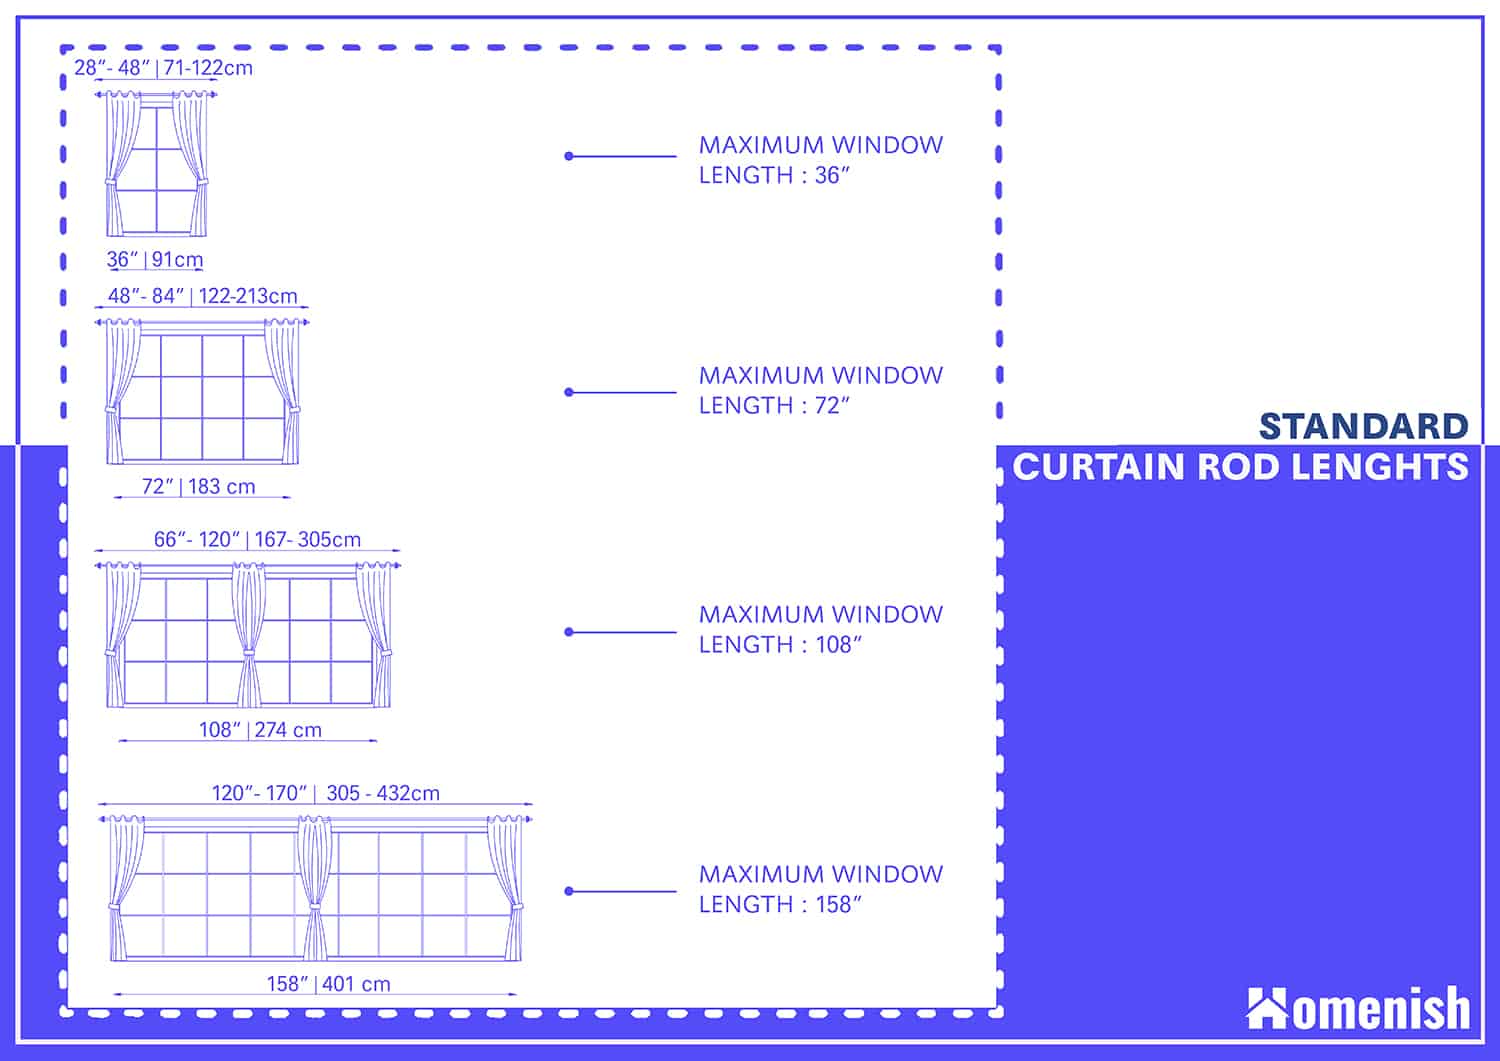 Curtain Rod Lengths Explained Diagram, Extra Long Curtain Rods 200 Inches